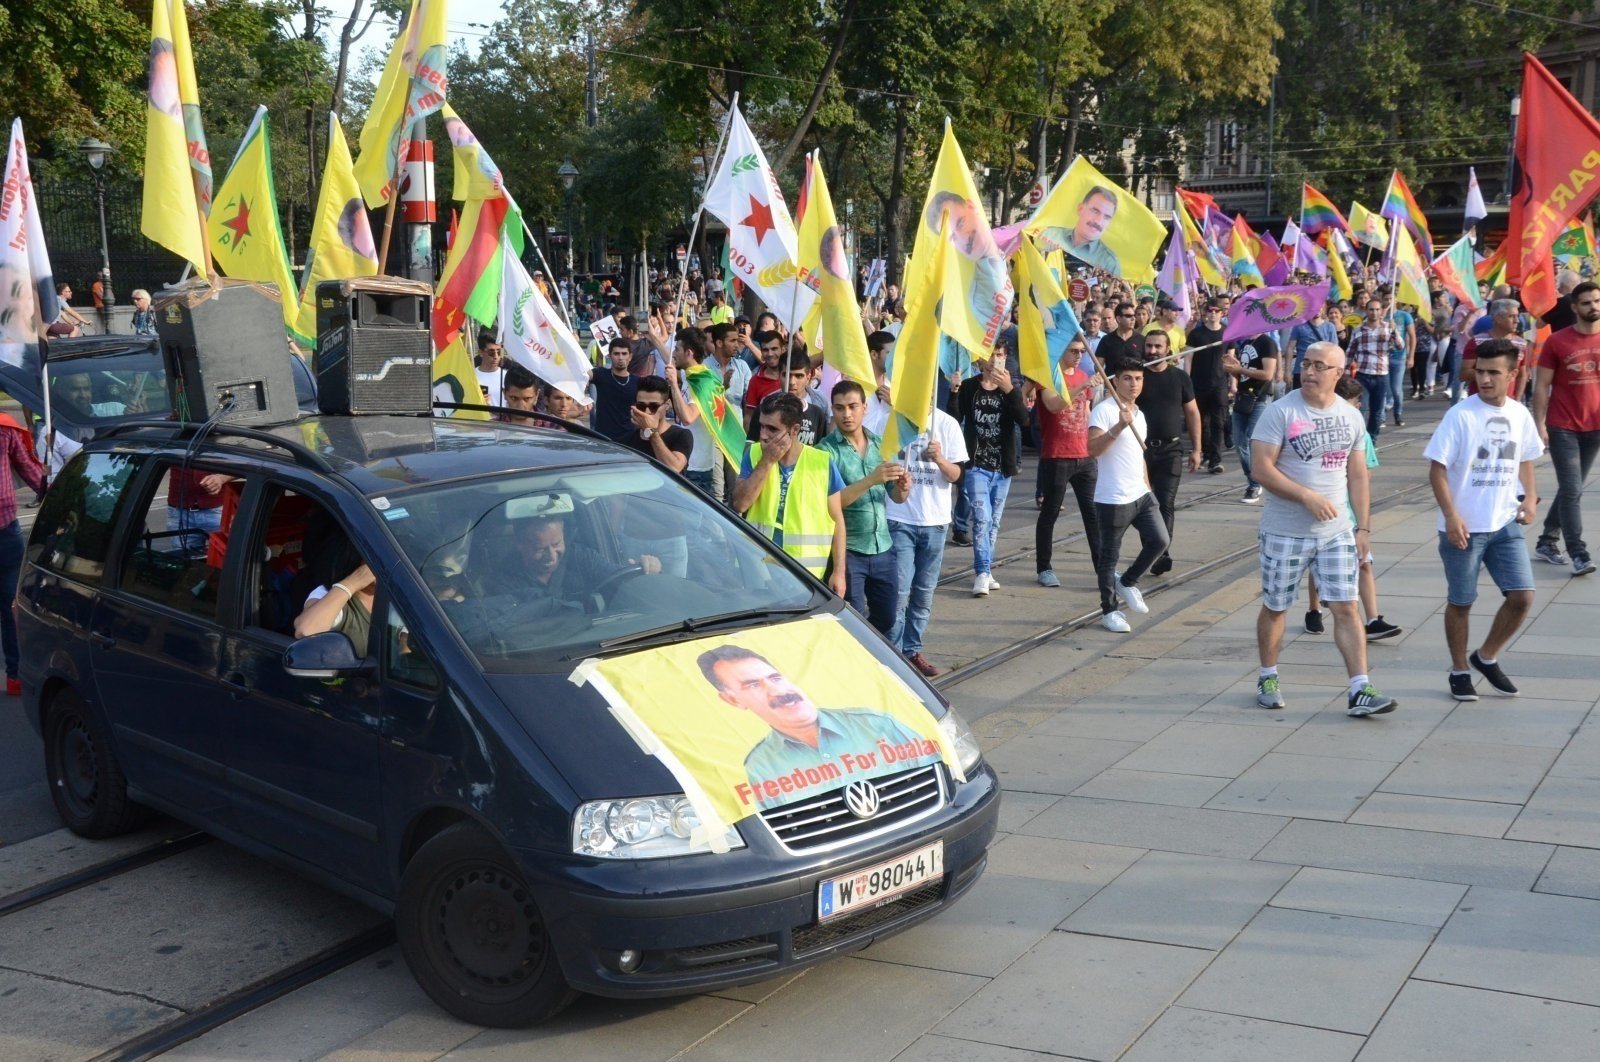 Pro-PKK protesters wave flags of the terrorist group and a picture of imprisoned terrorist leader Abdullah Öcalan is seen on a vehicle, Vienna, Austria, June 28, 2020. (AA Photo)